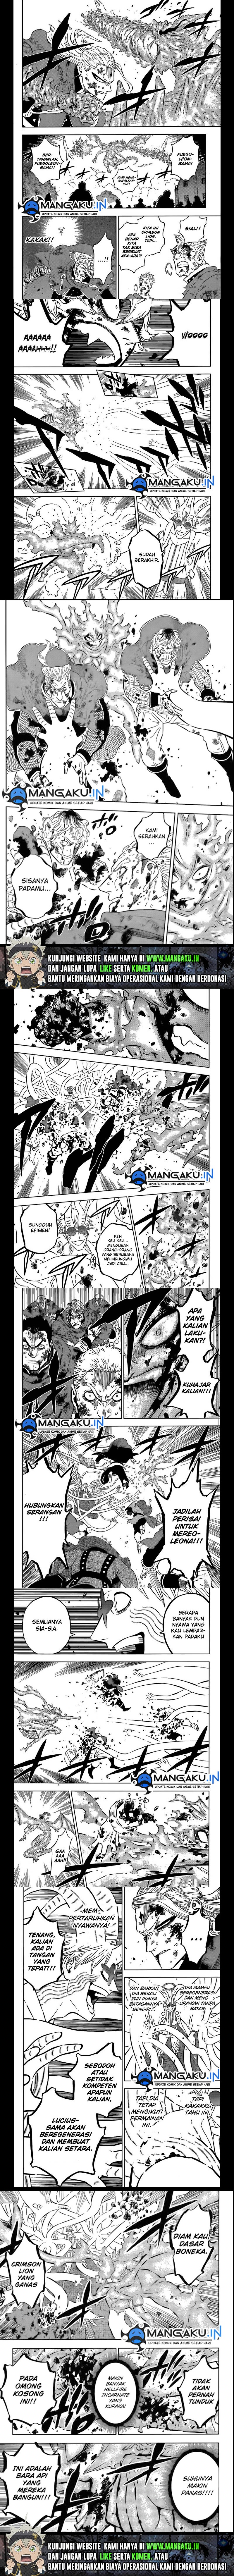 Black Clover Chapter 358 Bahasa Indonesia